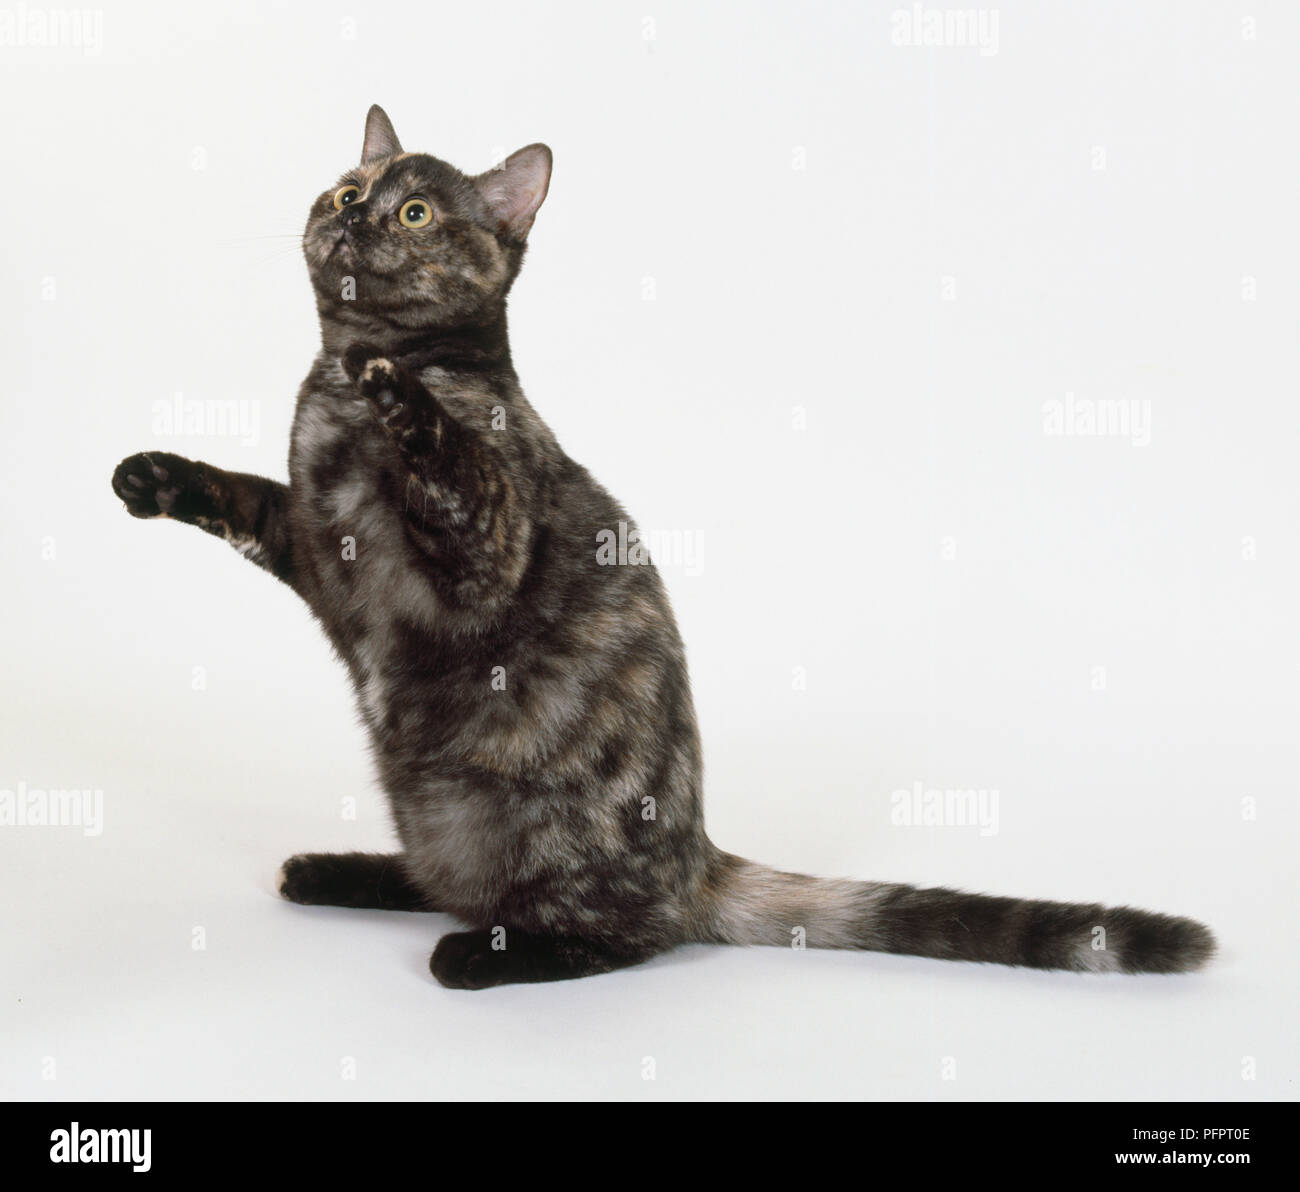 Tortie Smoke European shorthaired cat with good contrast in ourter colour, sitting on hind legs with fore paws raised. Stock Photo